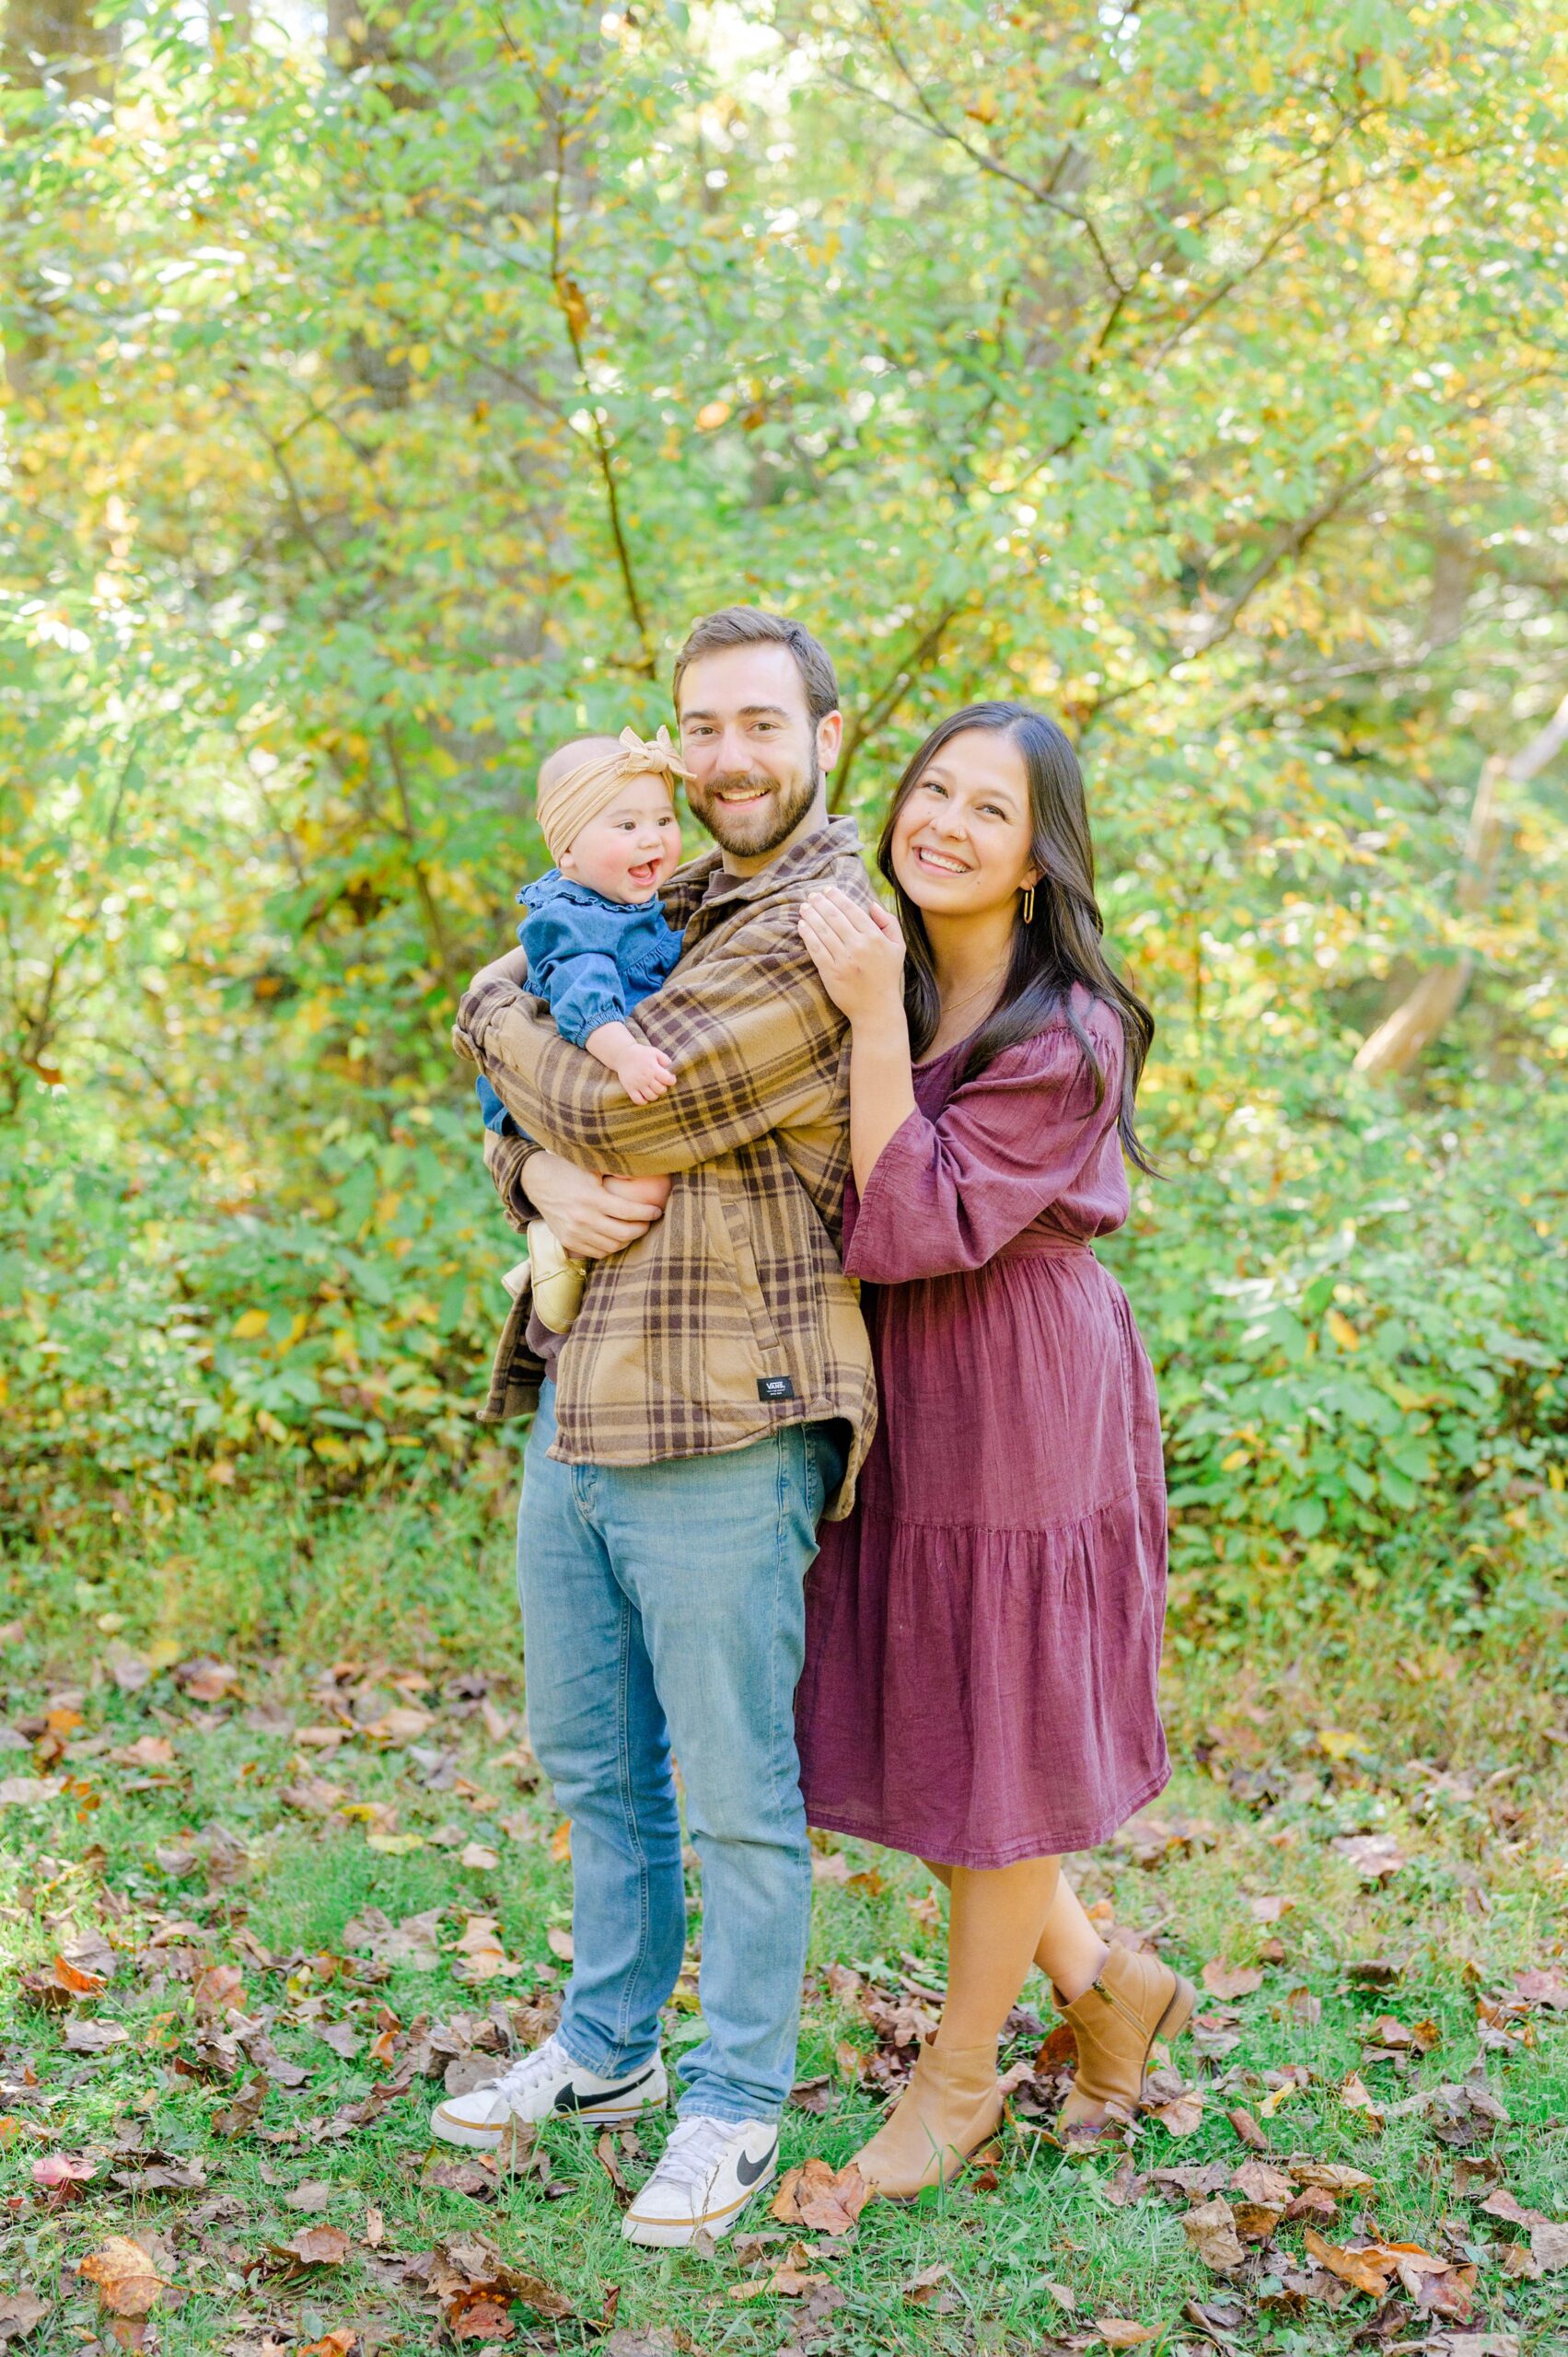 Family photo session at Oregon Ridge Park in Hunt Valley, MD photographed by Baltimore Portrait Photographer Cait Kramer.